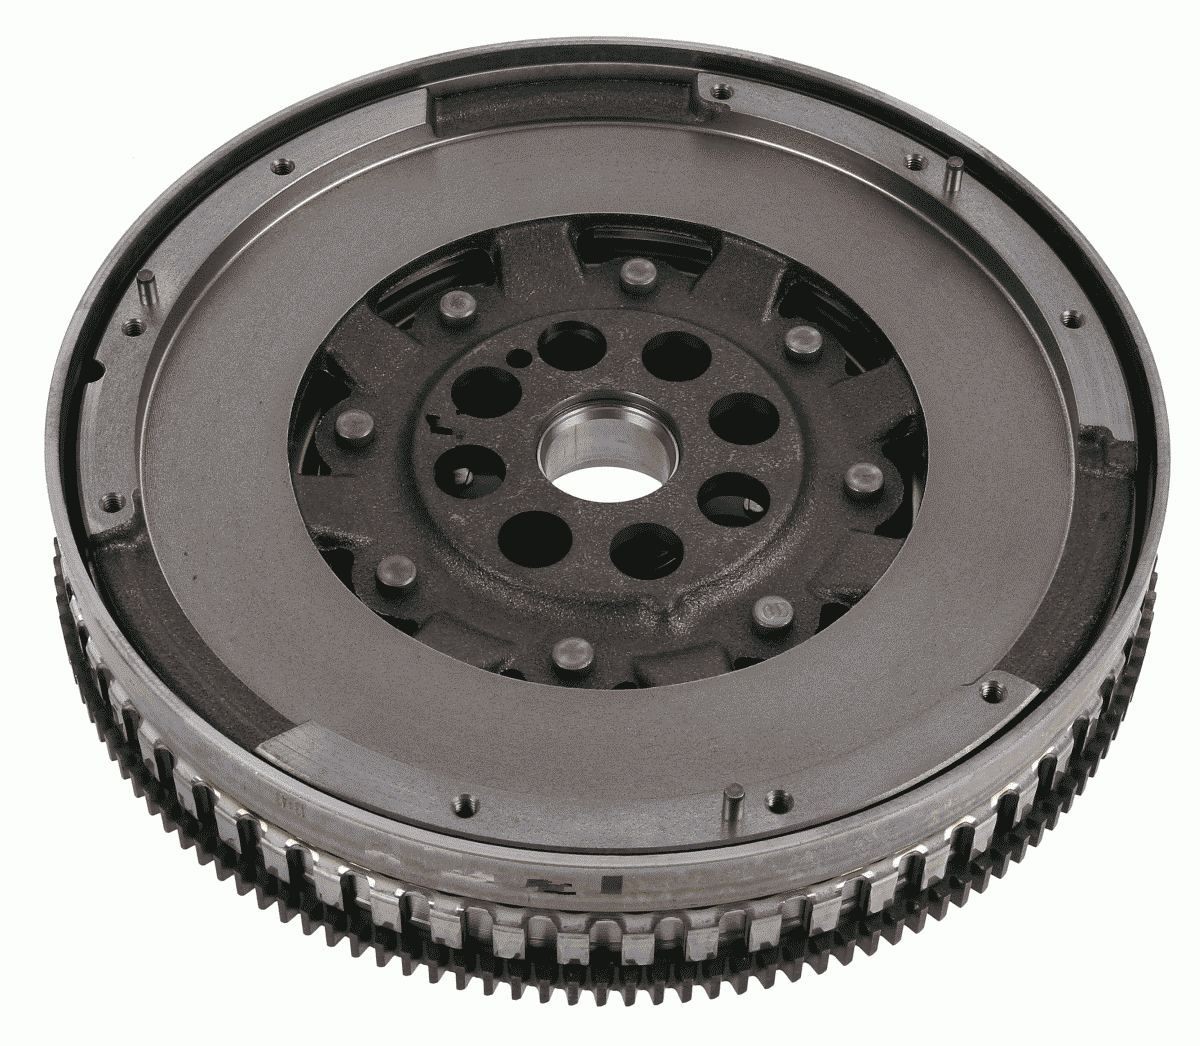 SACHS 2294 501 224 Flywheel RENAULT experience and price